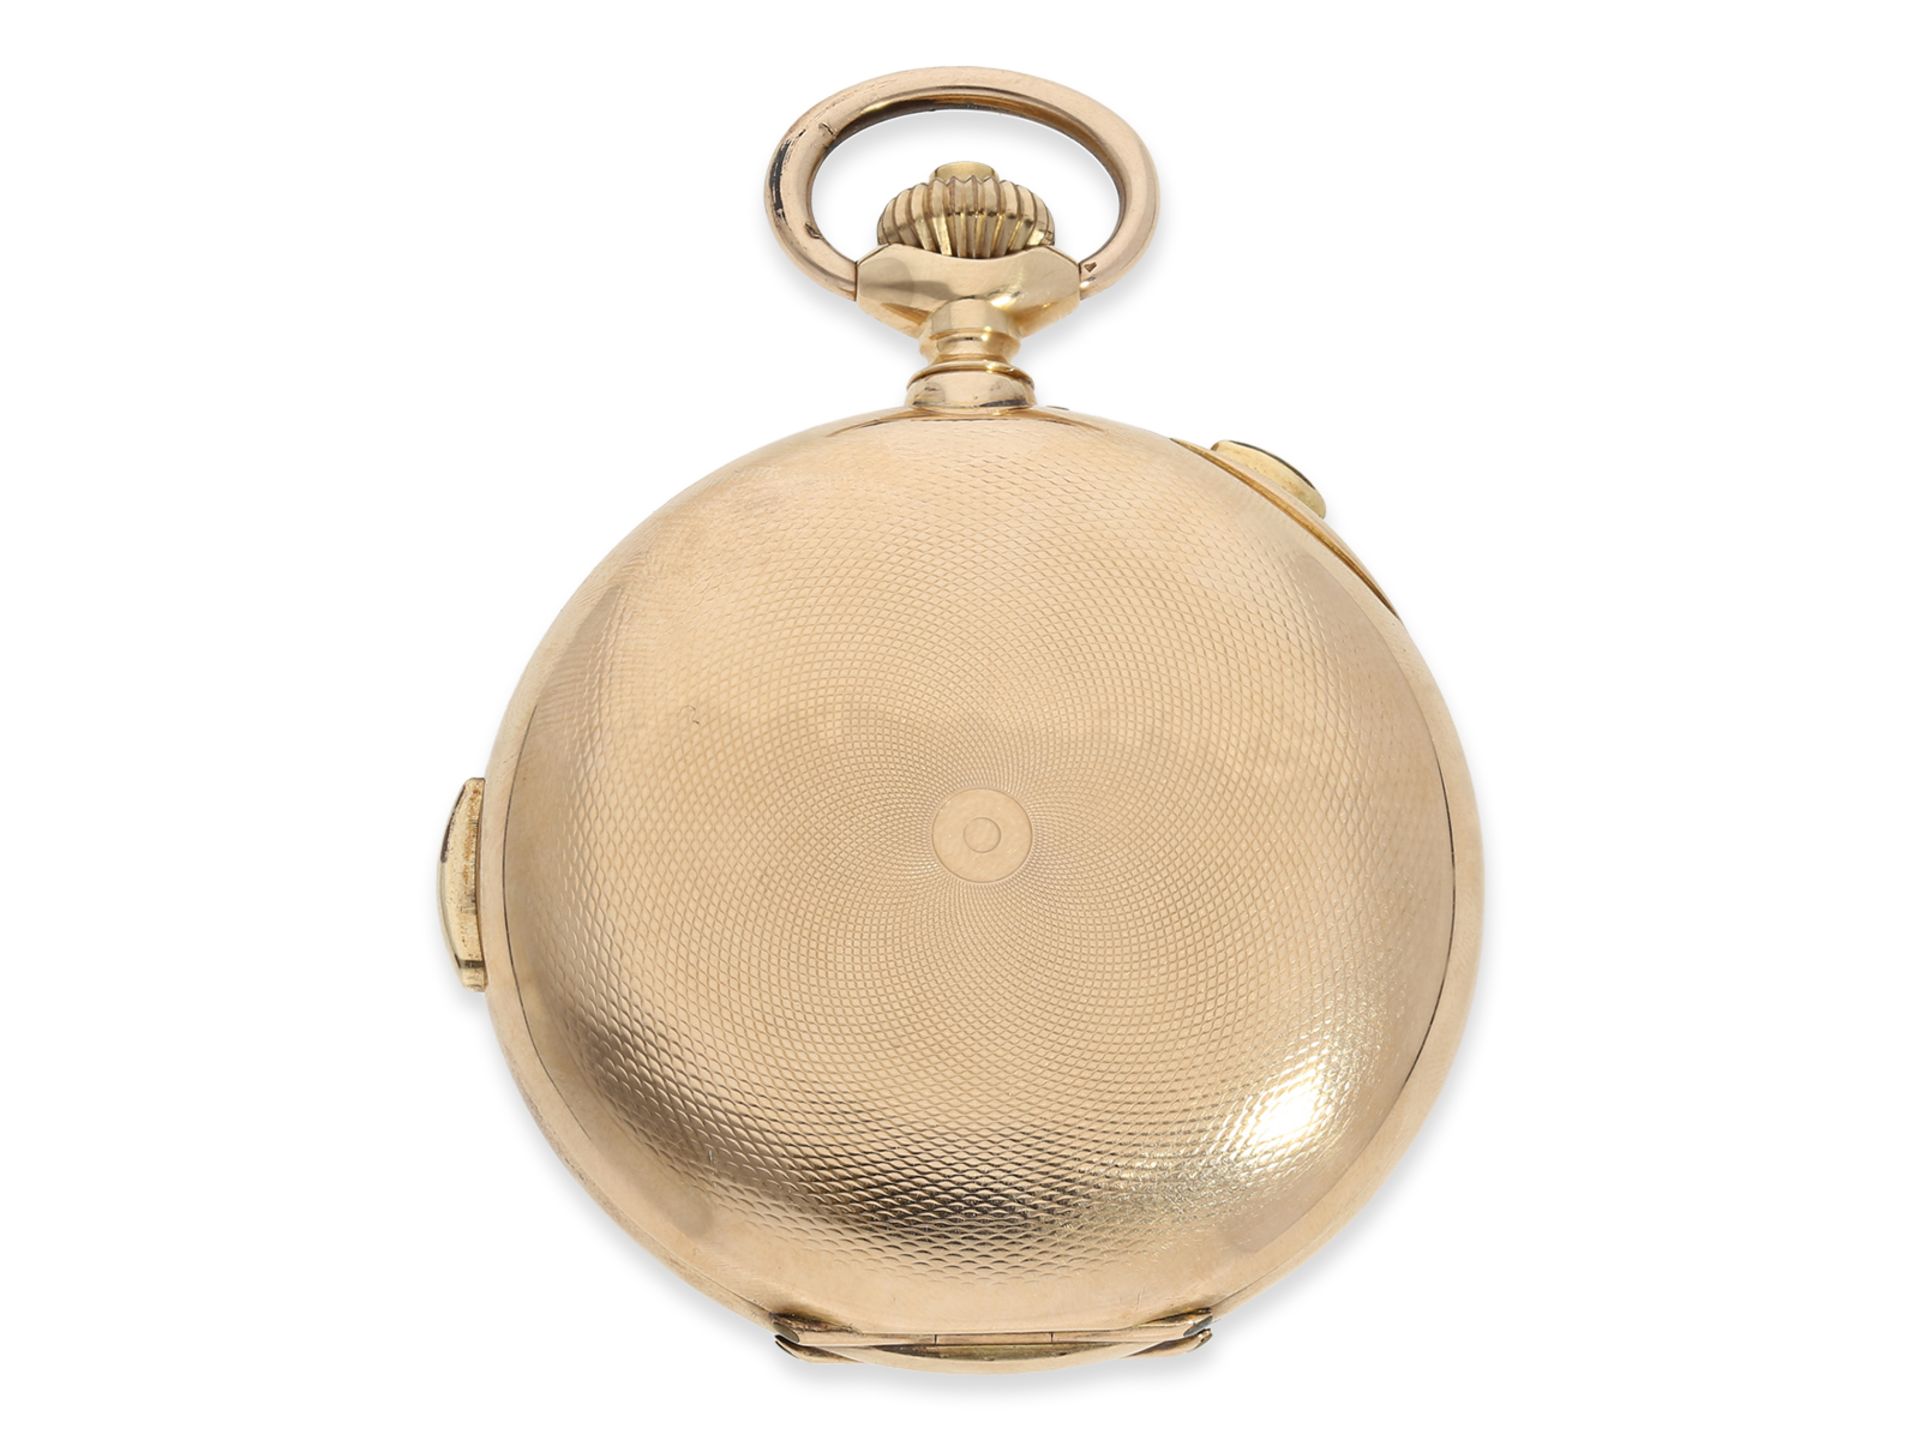 Pocket watch: impressive gold hunting case watch with repeater and chronograph, Audemars Freres Gene - Image 7 of 8